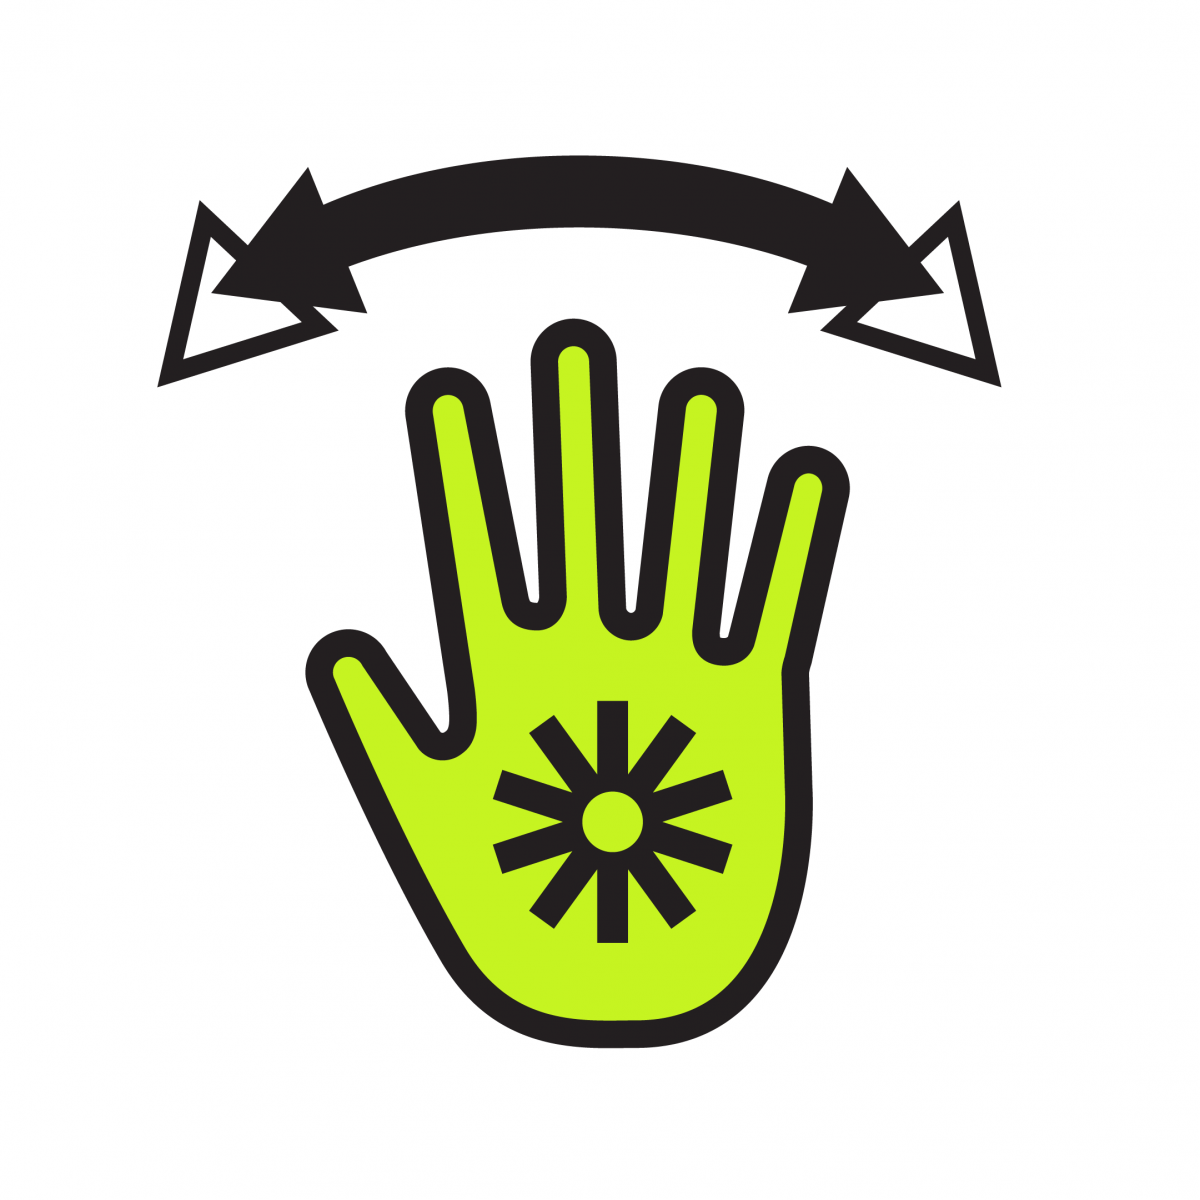 illustration of an open green hand with the GMCDP logo, ten thick black "spokes" radiating from a hollow inner circle. Above the harnd is a double ended arrow signifying movement, as in "hello"